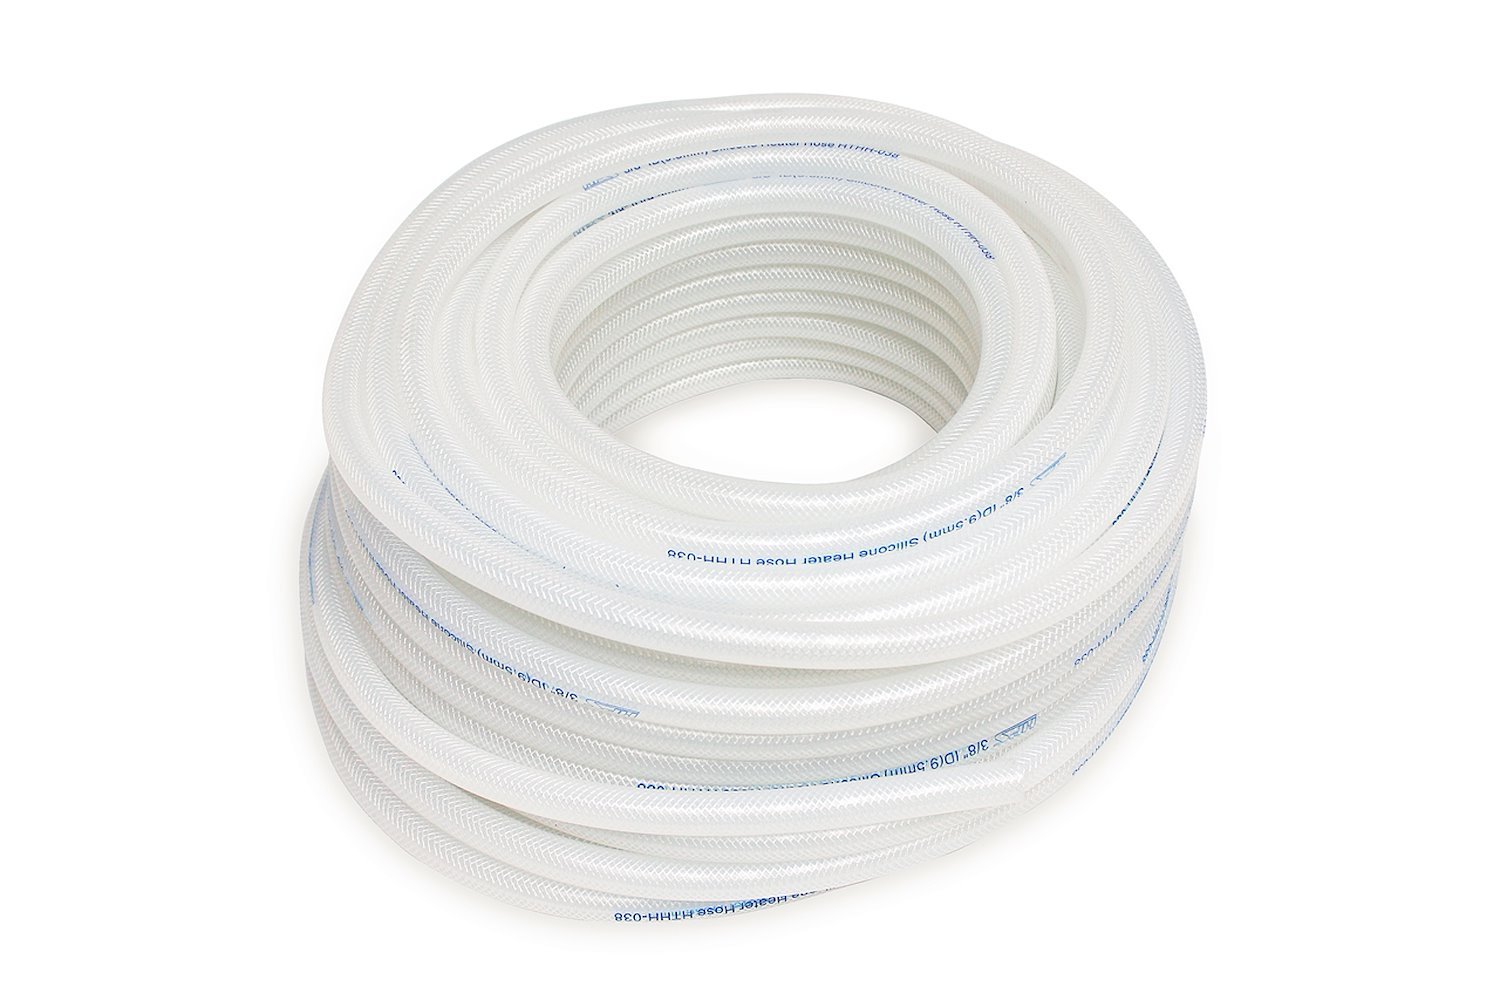 HTHH-013-CLEARx25 Silicone Heater Hose Tubing, High-Temp Reinforced, 1/8 in. ID, 25 ft. Roll, Clear